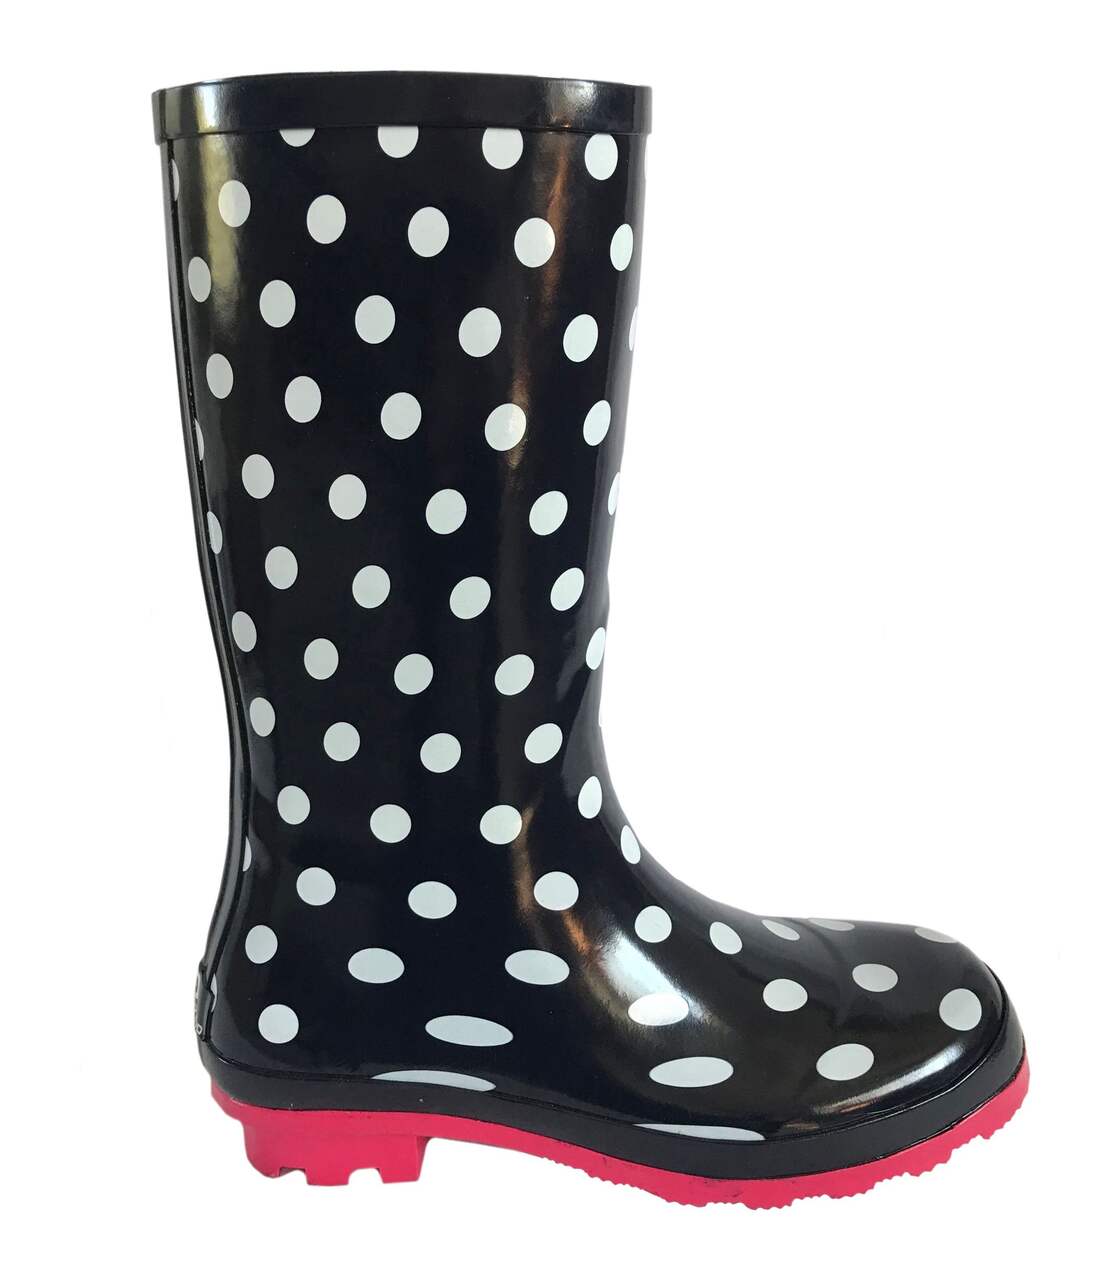 Women's Waterproof Polka Dot Rubber Rain Boots, Durable Outsole, Black with  White Dots